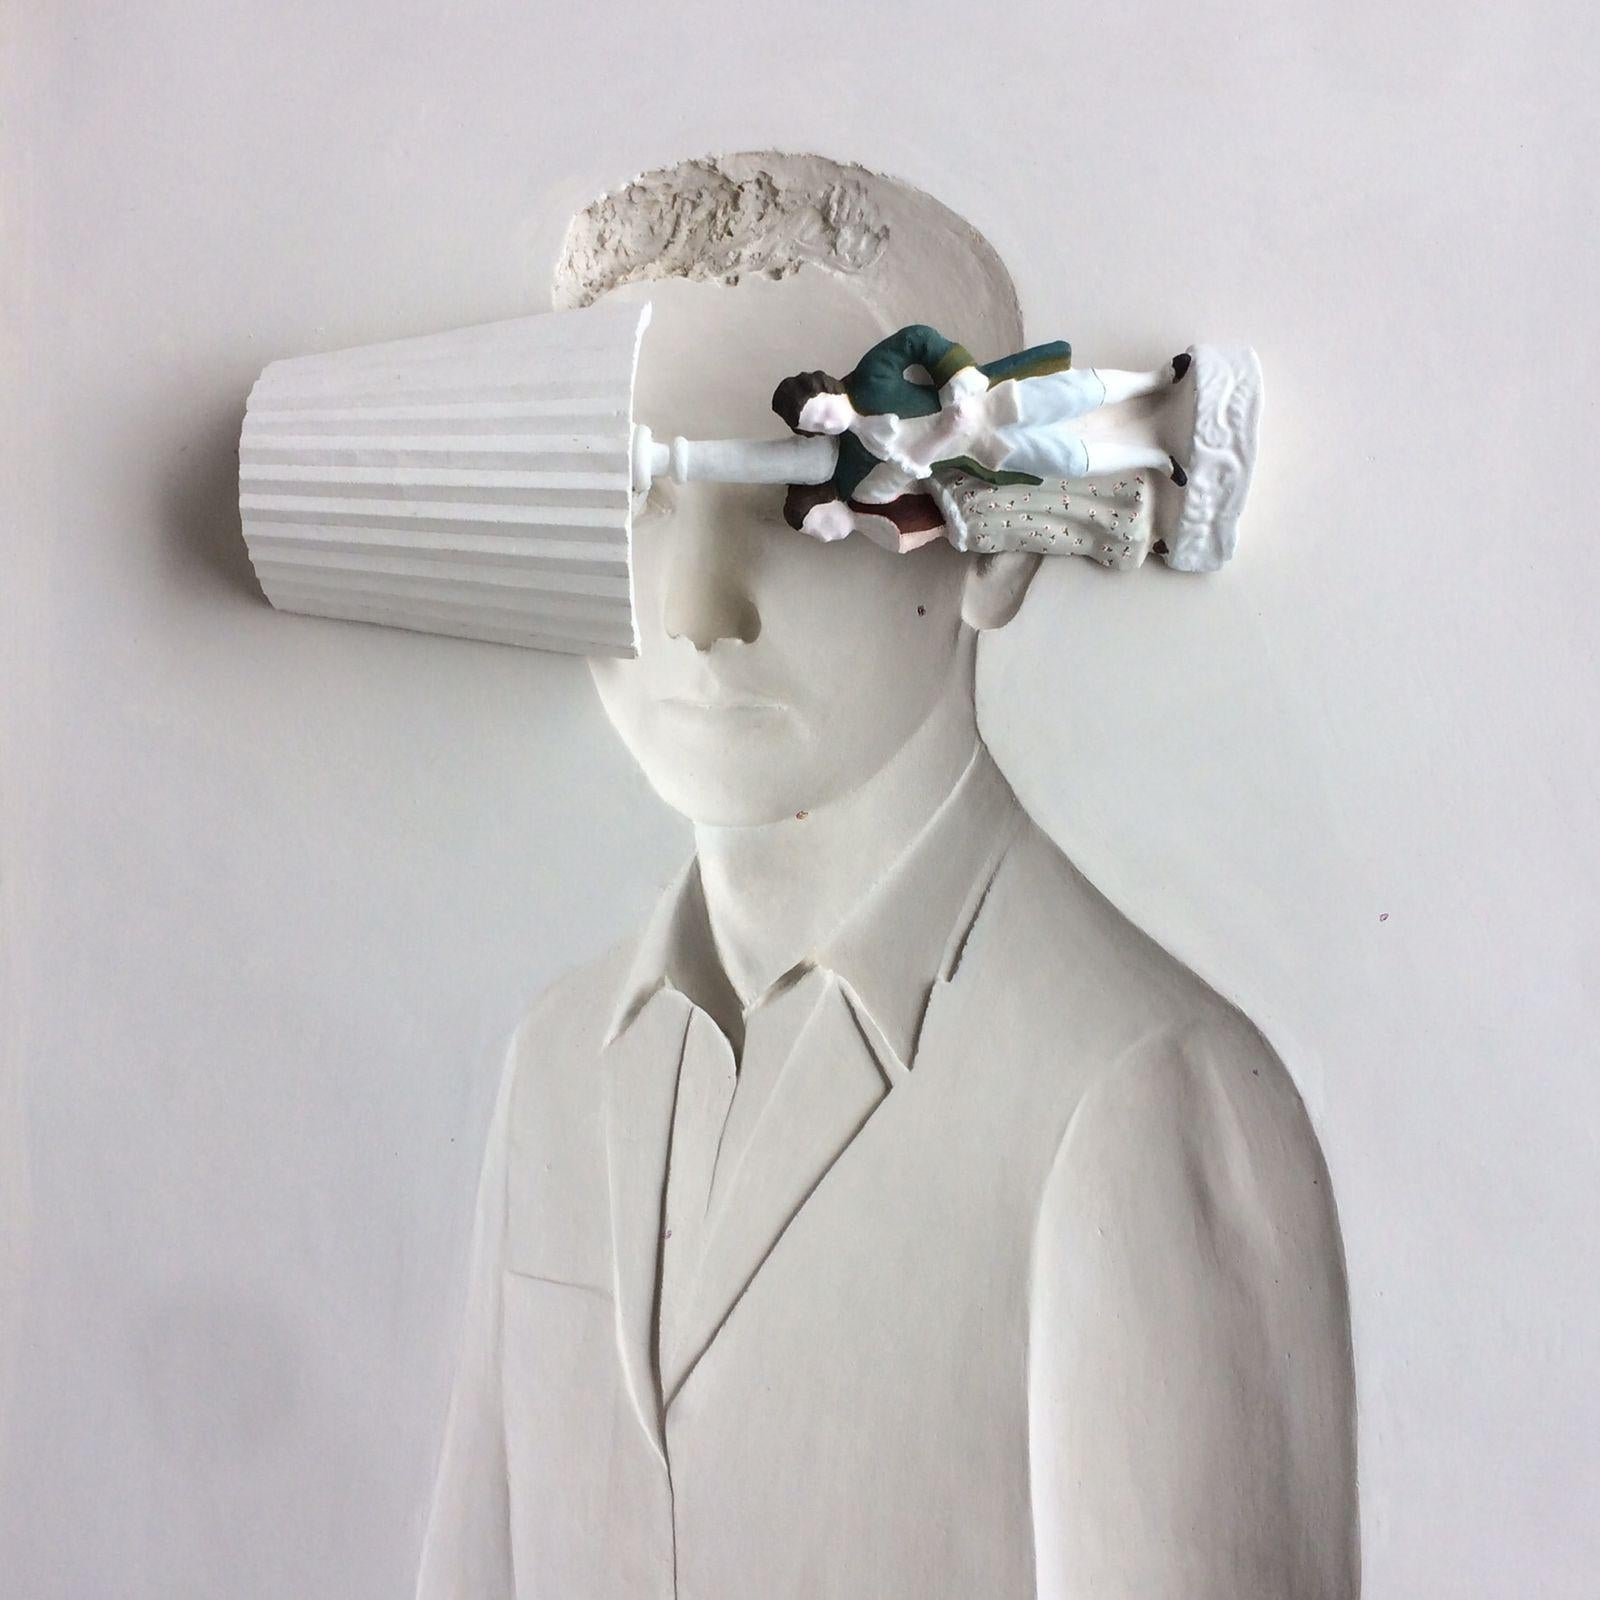 Untitled by Tito Monzón - Sculpture by Unknown